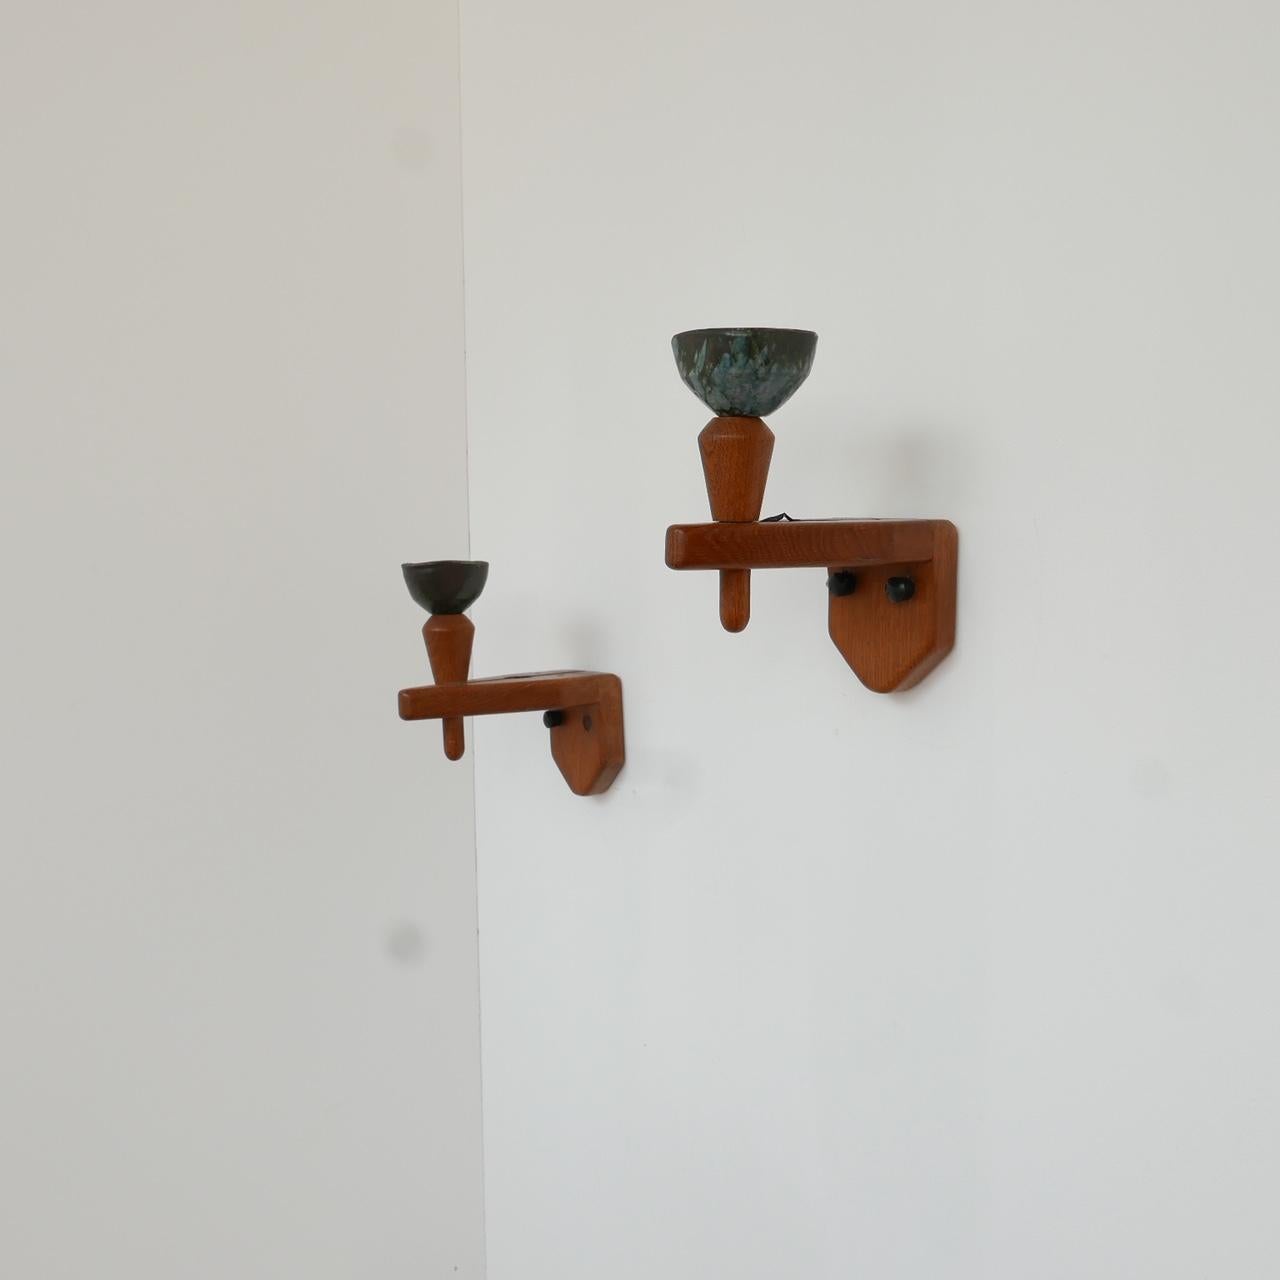 A pair of wall lights by French designers Guillerme et Chambron.

Oak with original ceramics.

The ceramics are the same finish, one is more triangular the other is more square.

Functional and stylish.

Dimensions: 10 W x 23 H x 21 H in